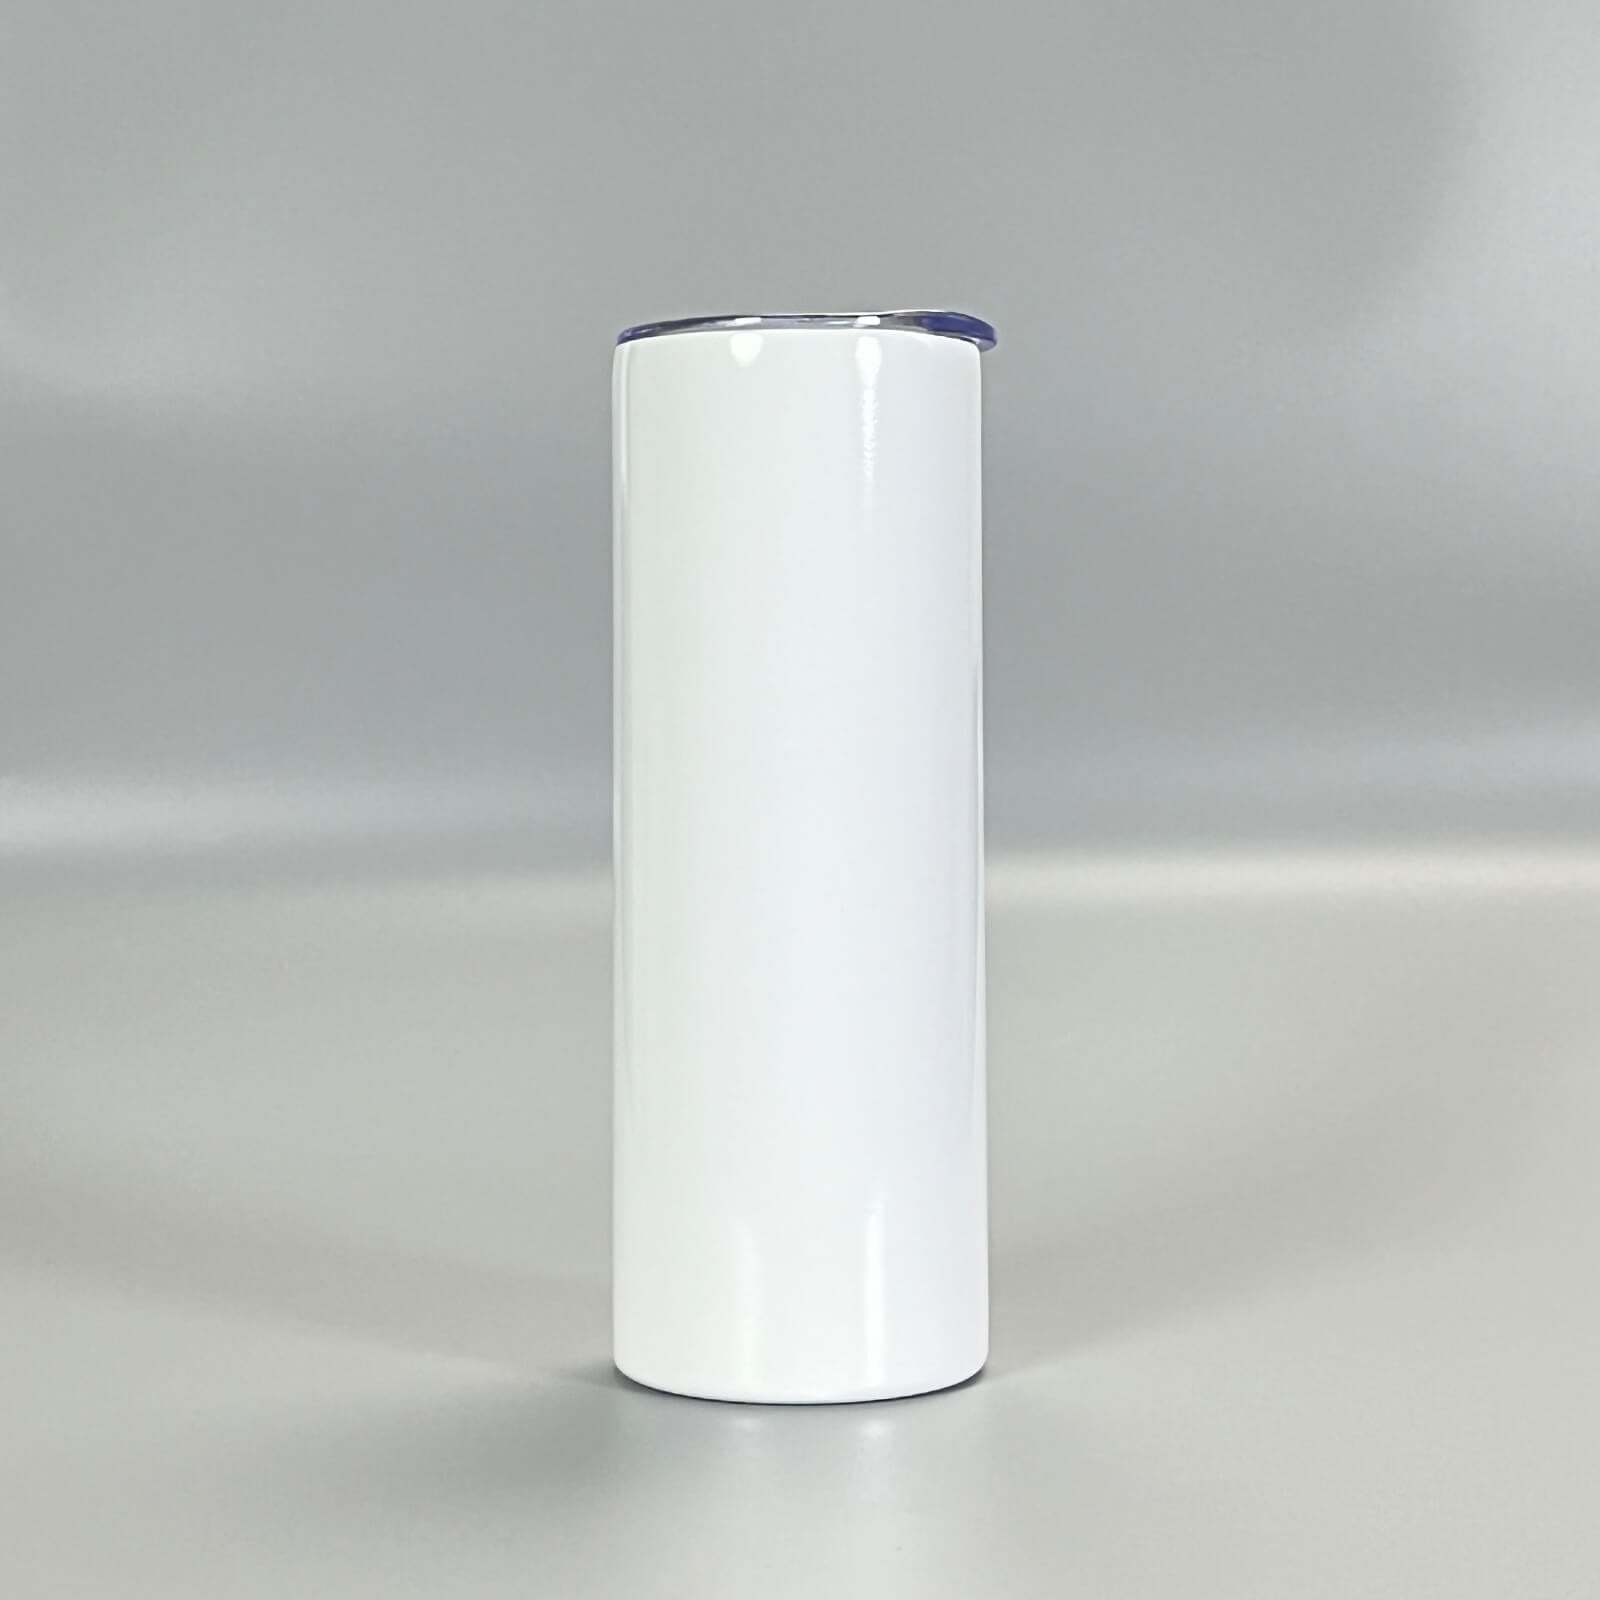 25 Pack 20oz Blank Sublimation Tumblers Skinny Straight White Stainless  Steel With Metal Straws and Rubber Bottoms 